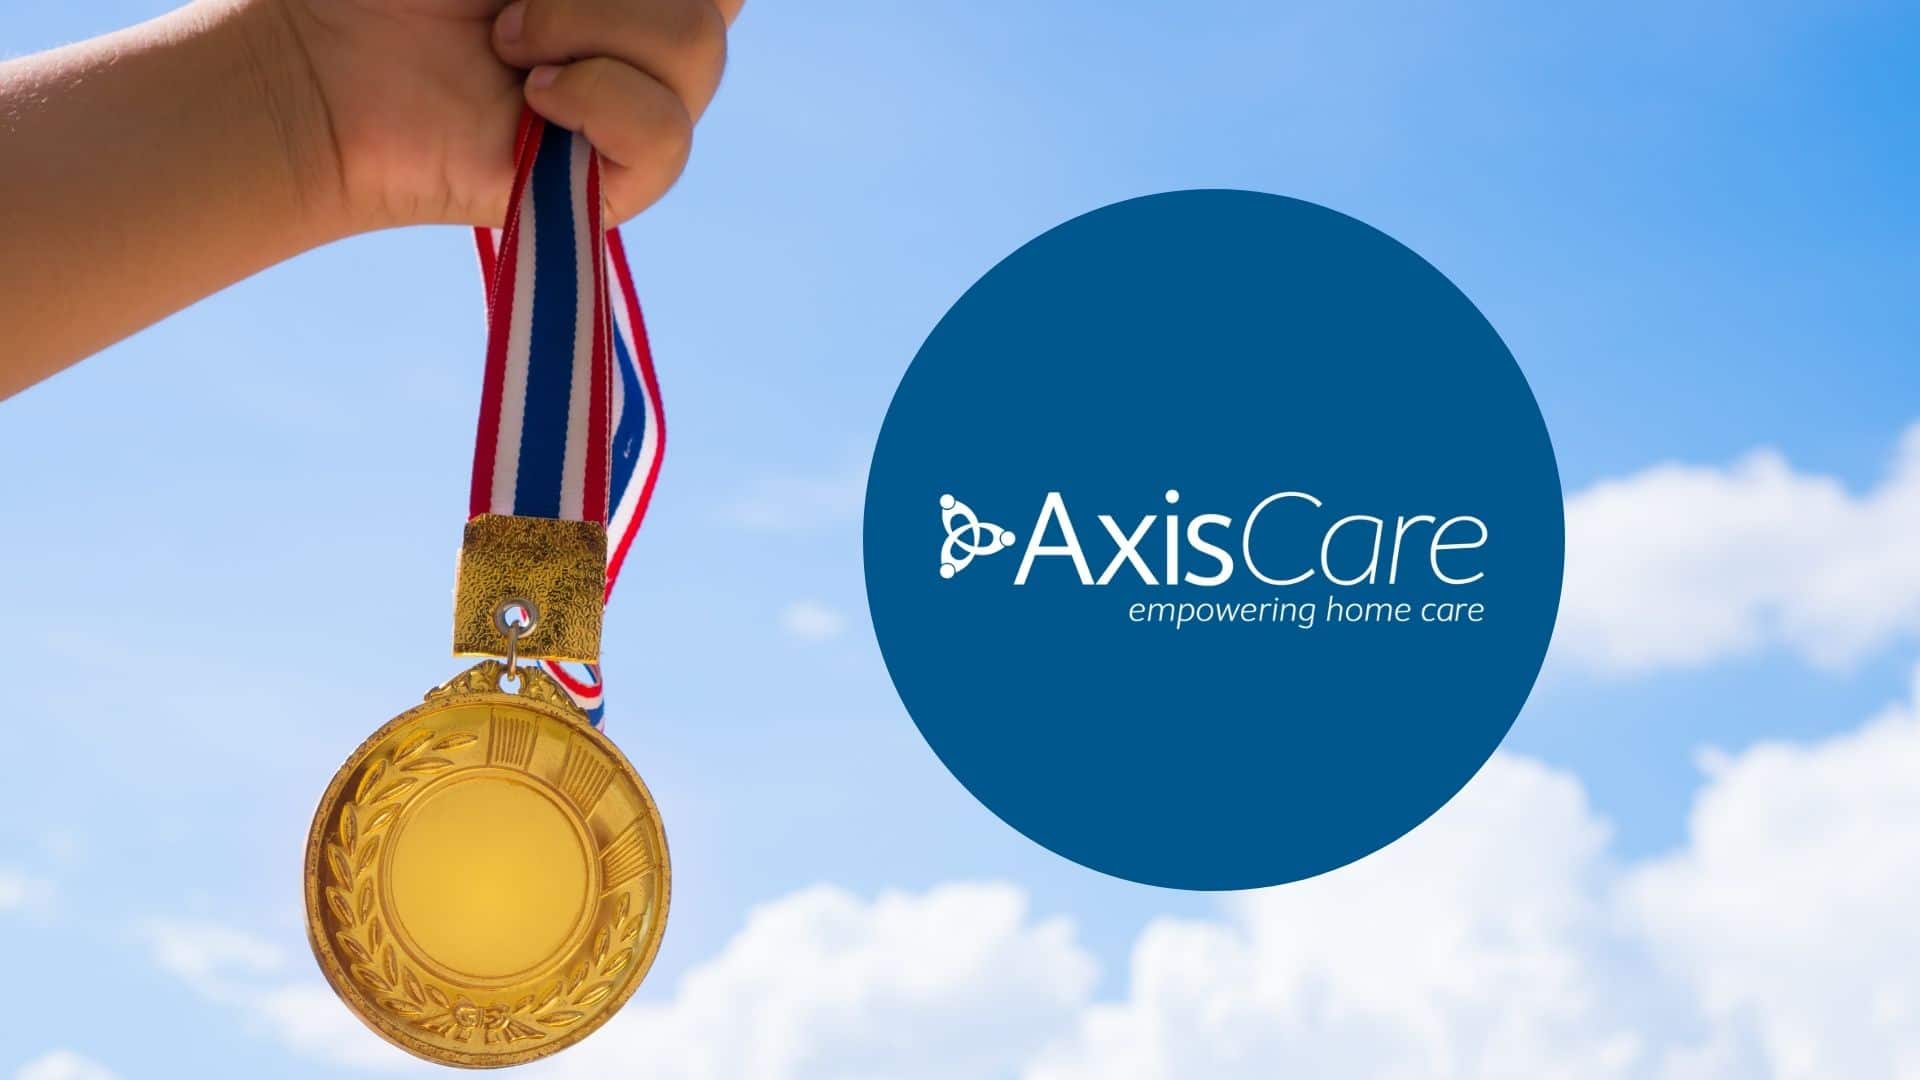 Gold medal next to AxisCare home care software logo